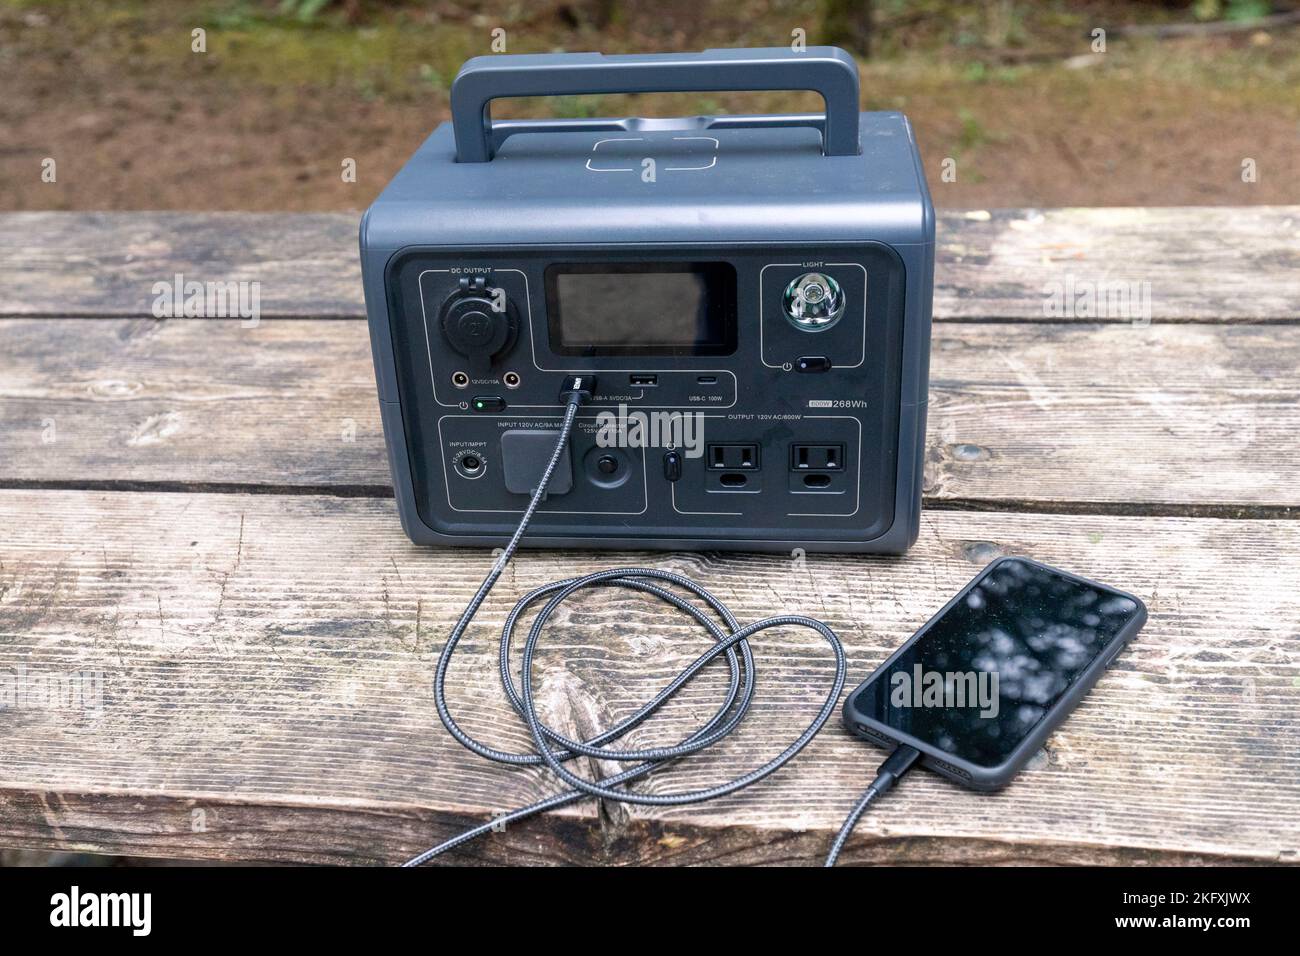 Portable Power Generator charging a smartphone - small emergency generator or good for car camping vanlife Stock Photo